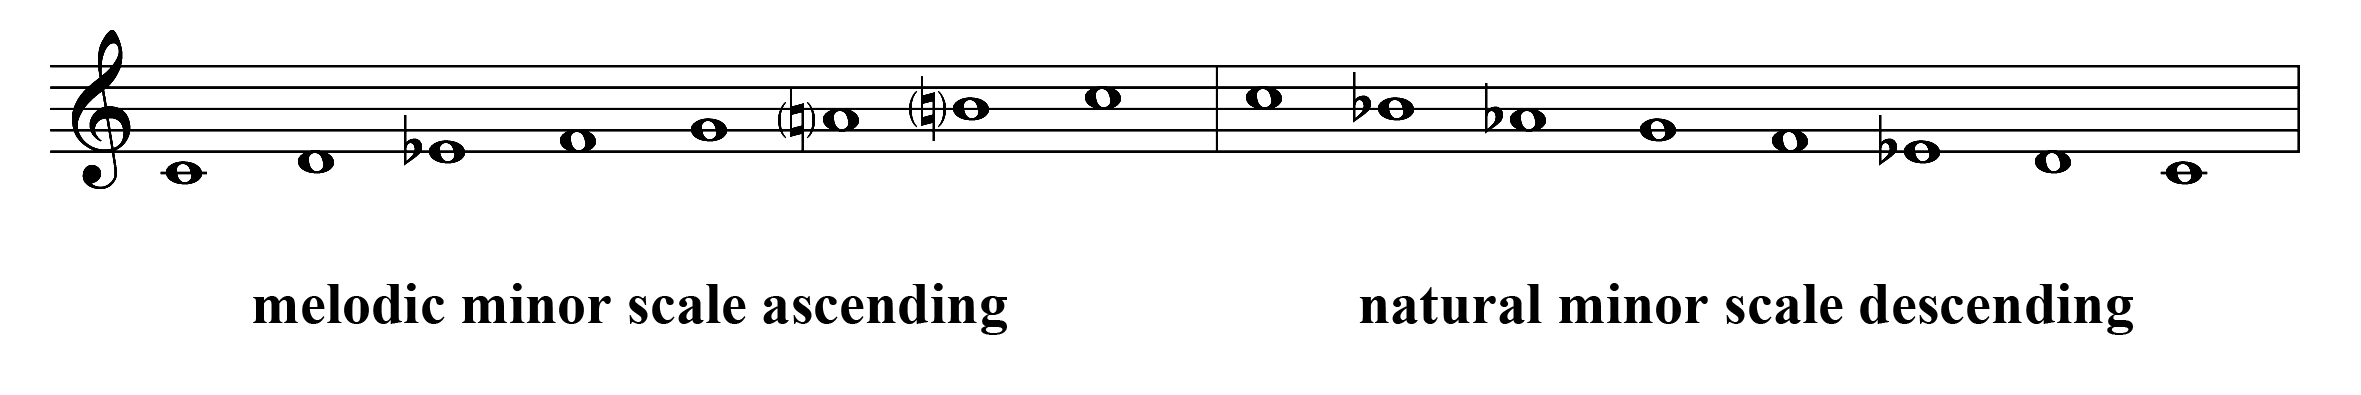 A C melodic minor scale with raised scale degrees six and seven ascending and natural minor scale descending.